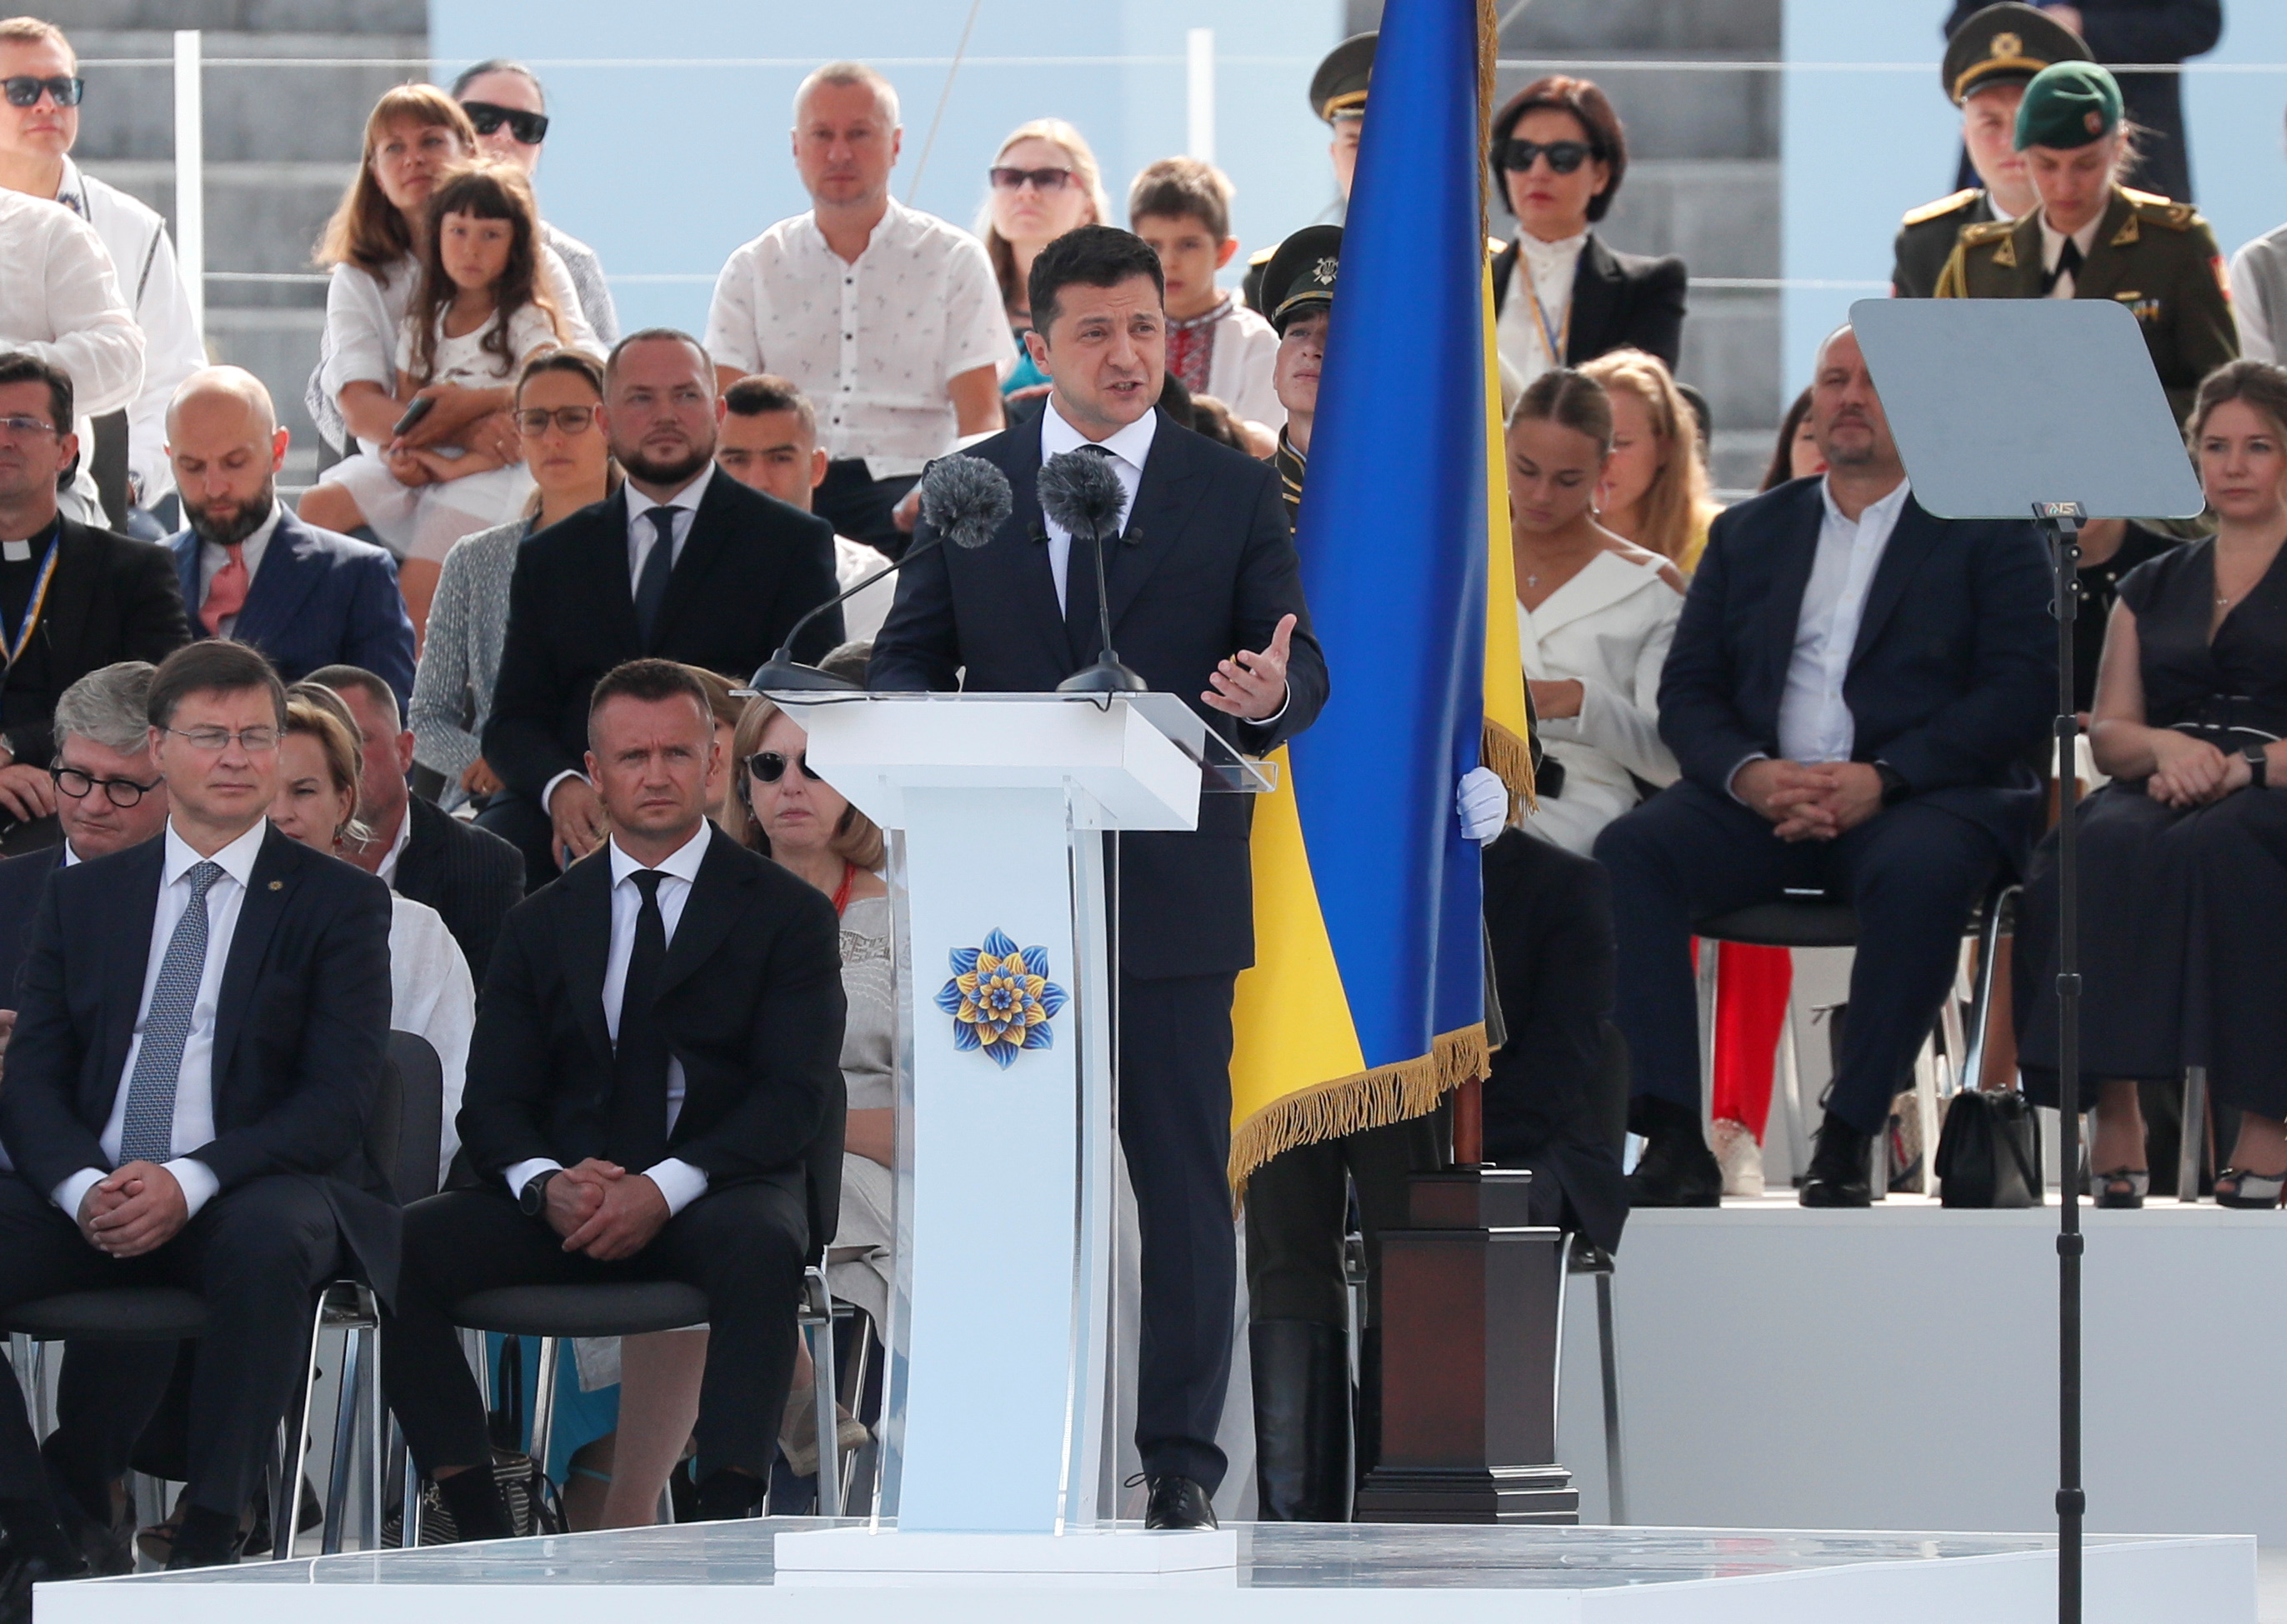 Ukraine's President Zelenskiy takes part in the Independence Day military parade in Kyiv